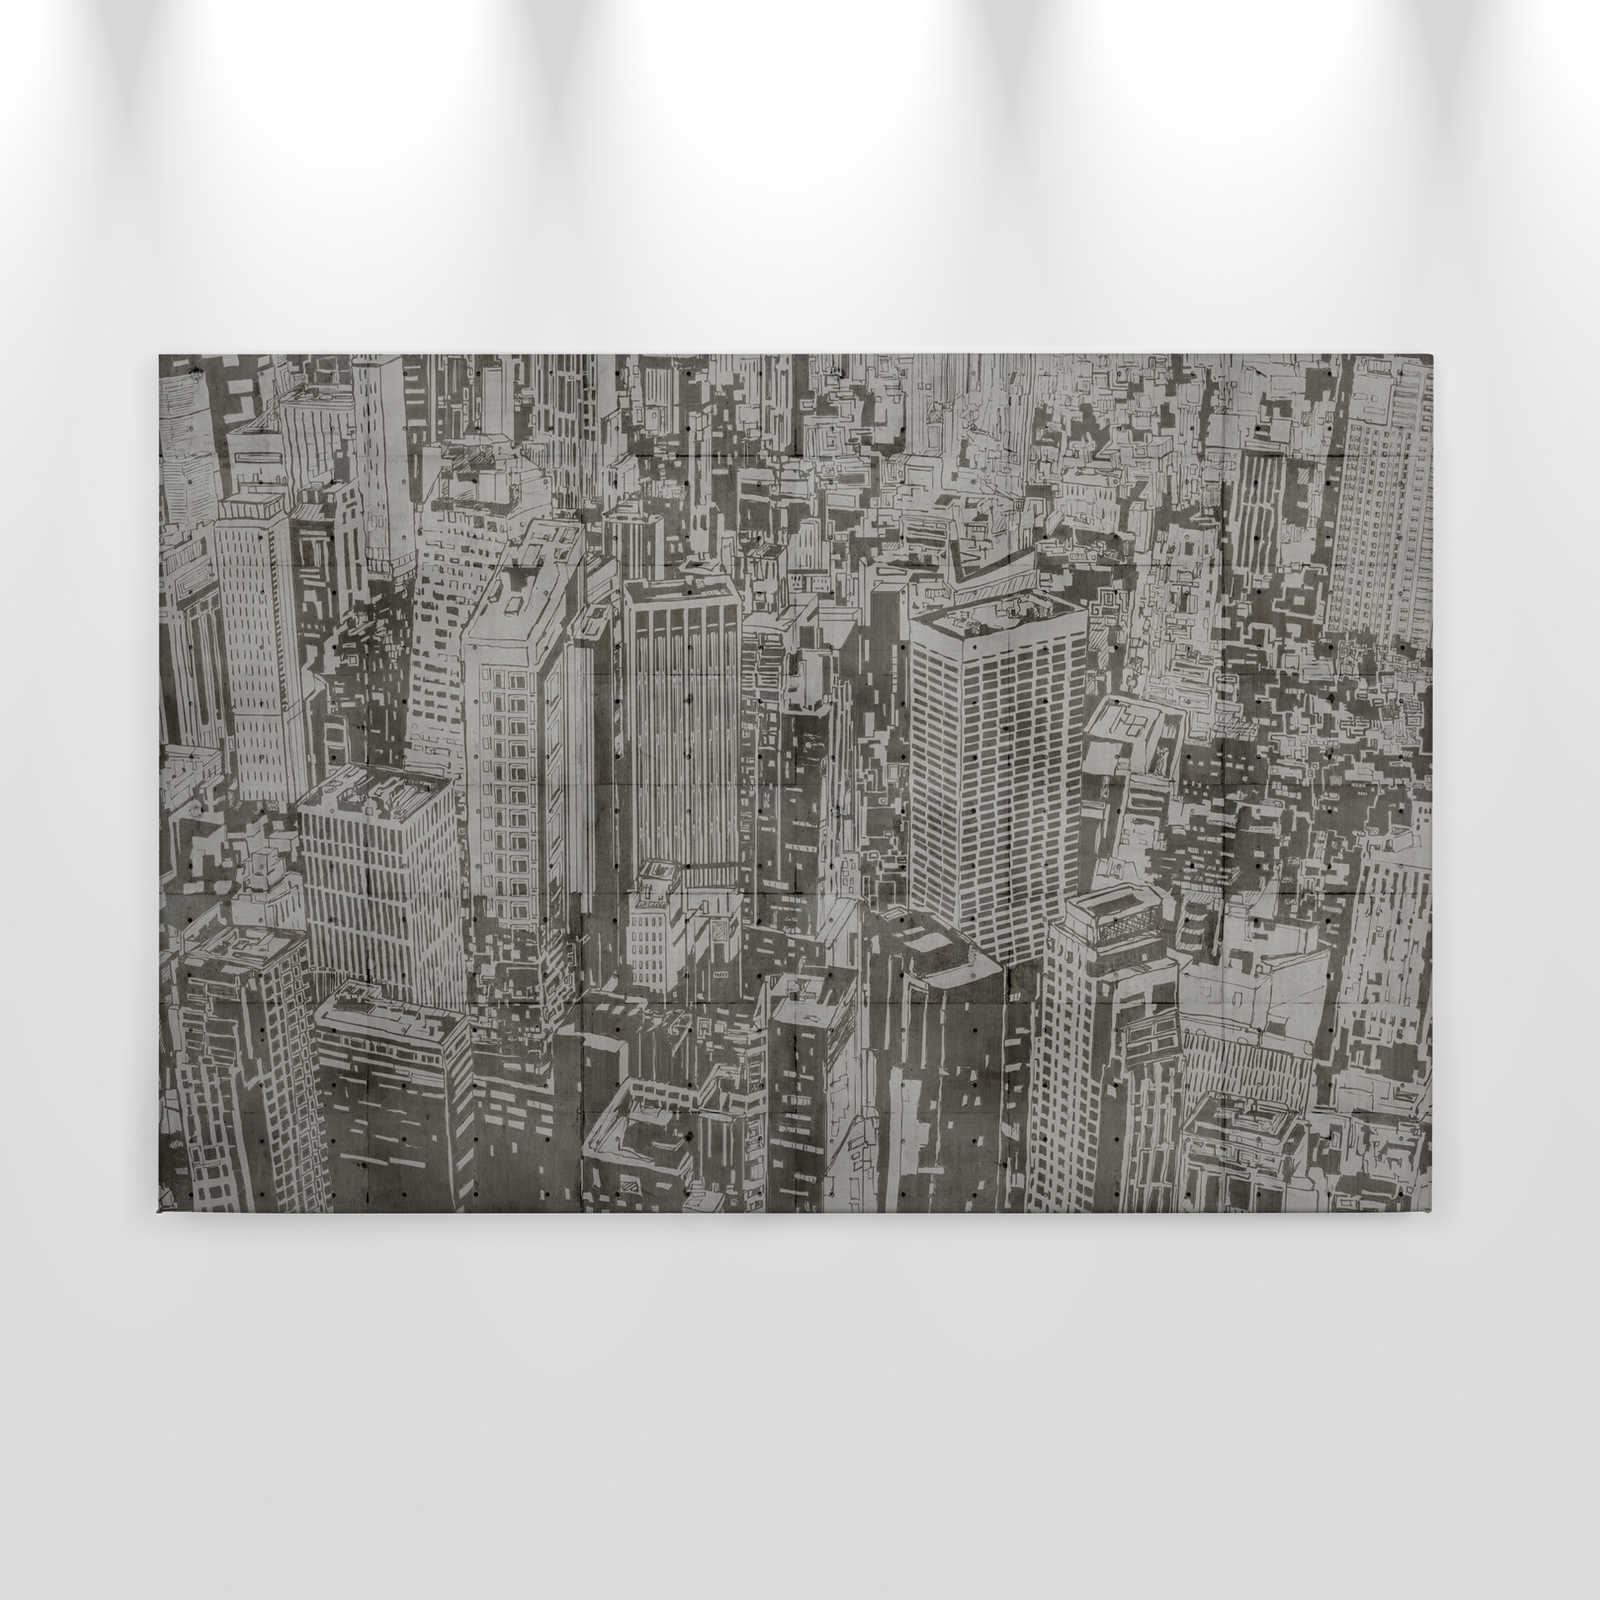             Downtown 2 - Concrete Structure Canvas Painting New York Look - 0.90 m x 0.60 m
        